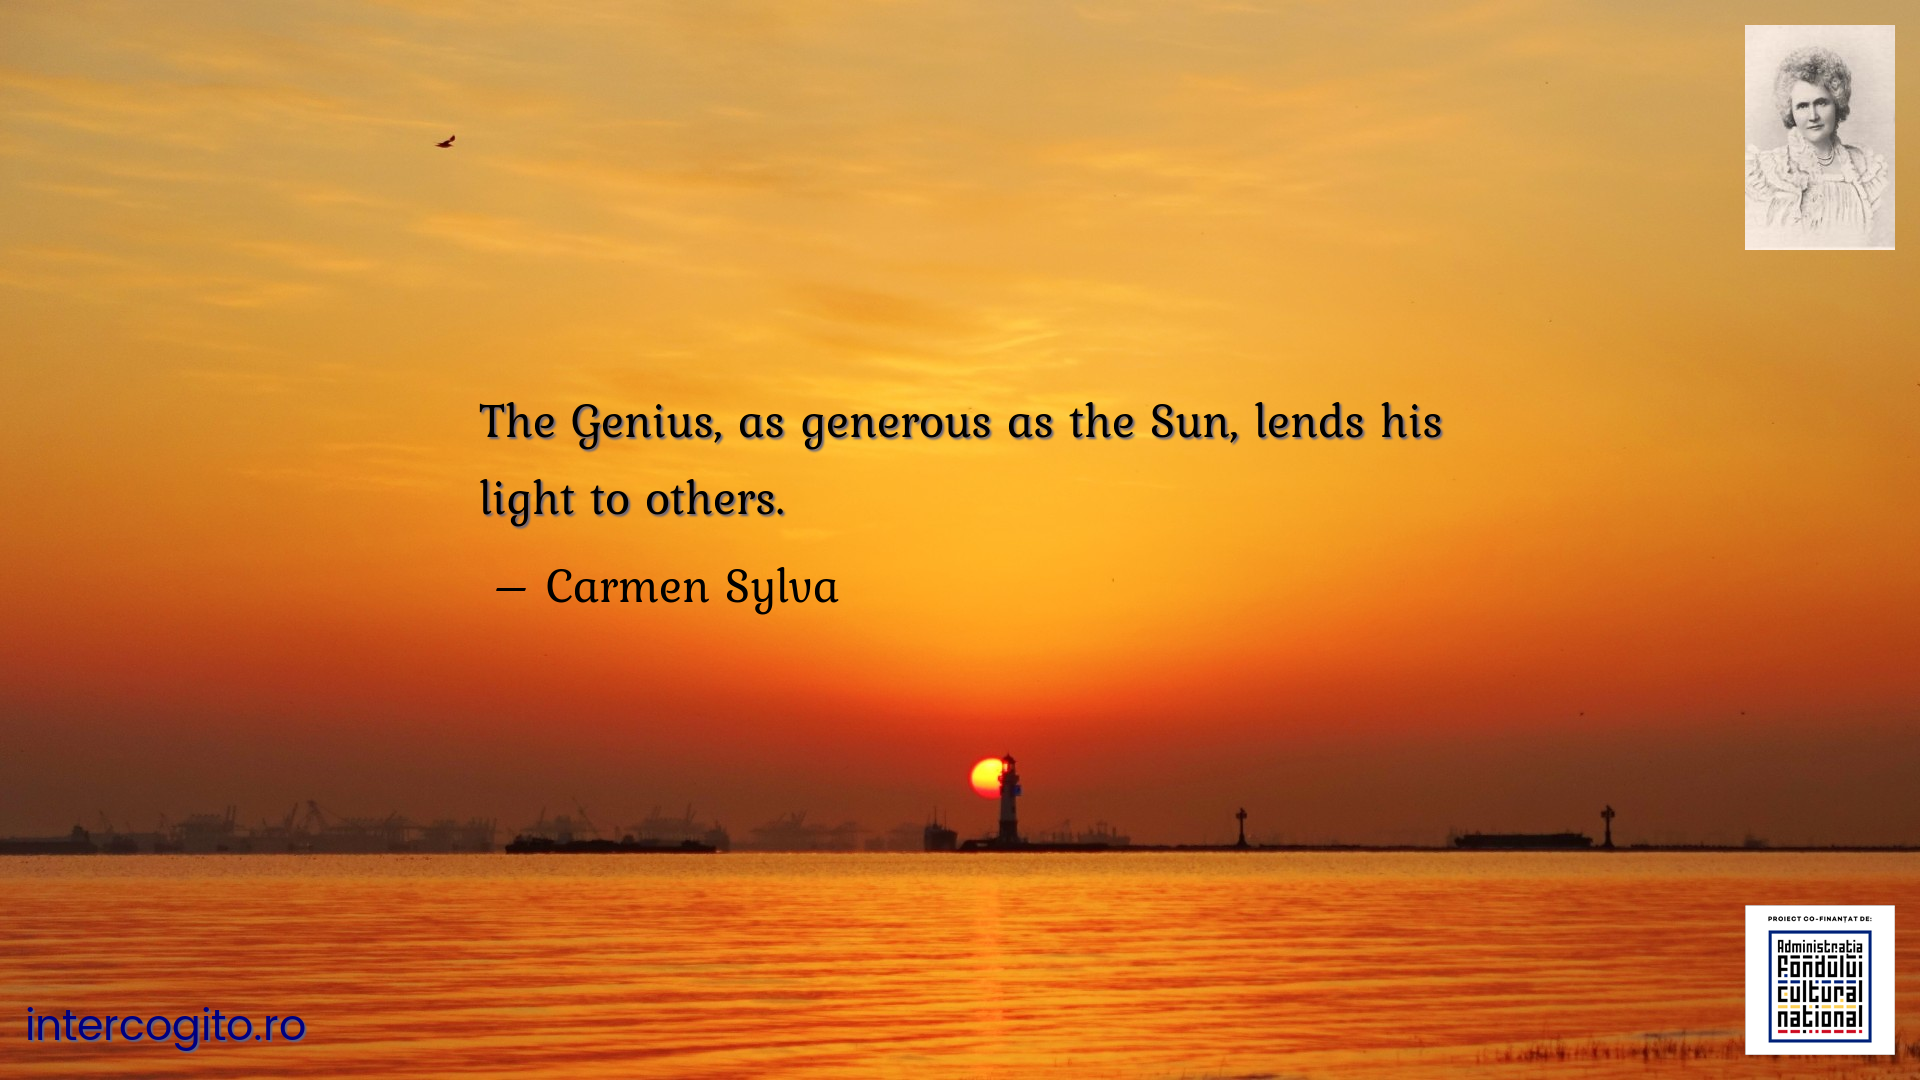 The Genius, as generous as the Sun, lends his light to others.